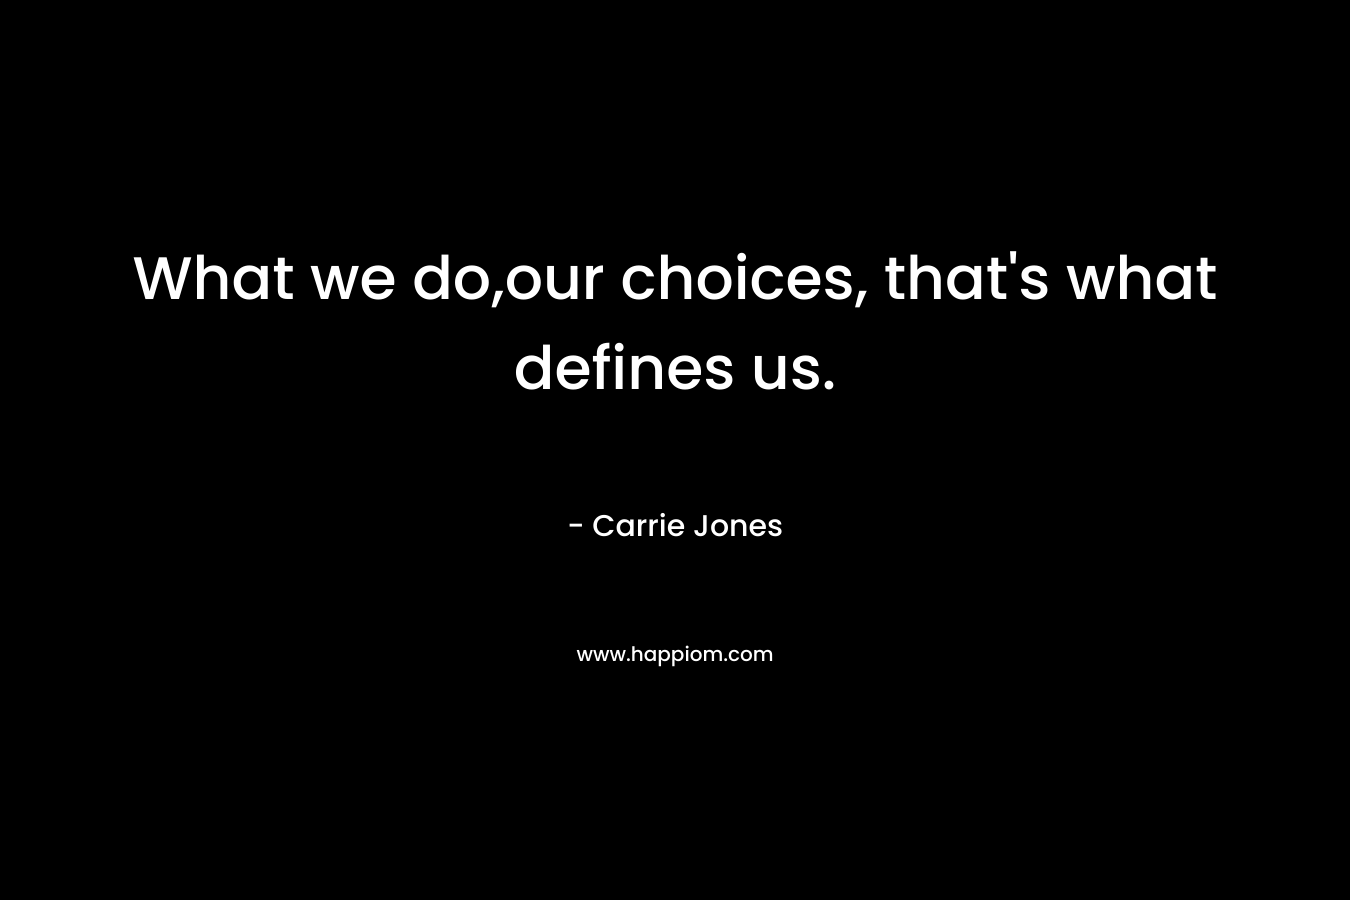 What we do,our choices, that's what defines us.